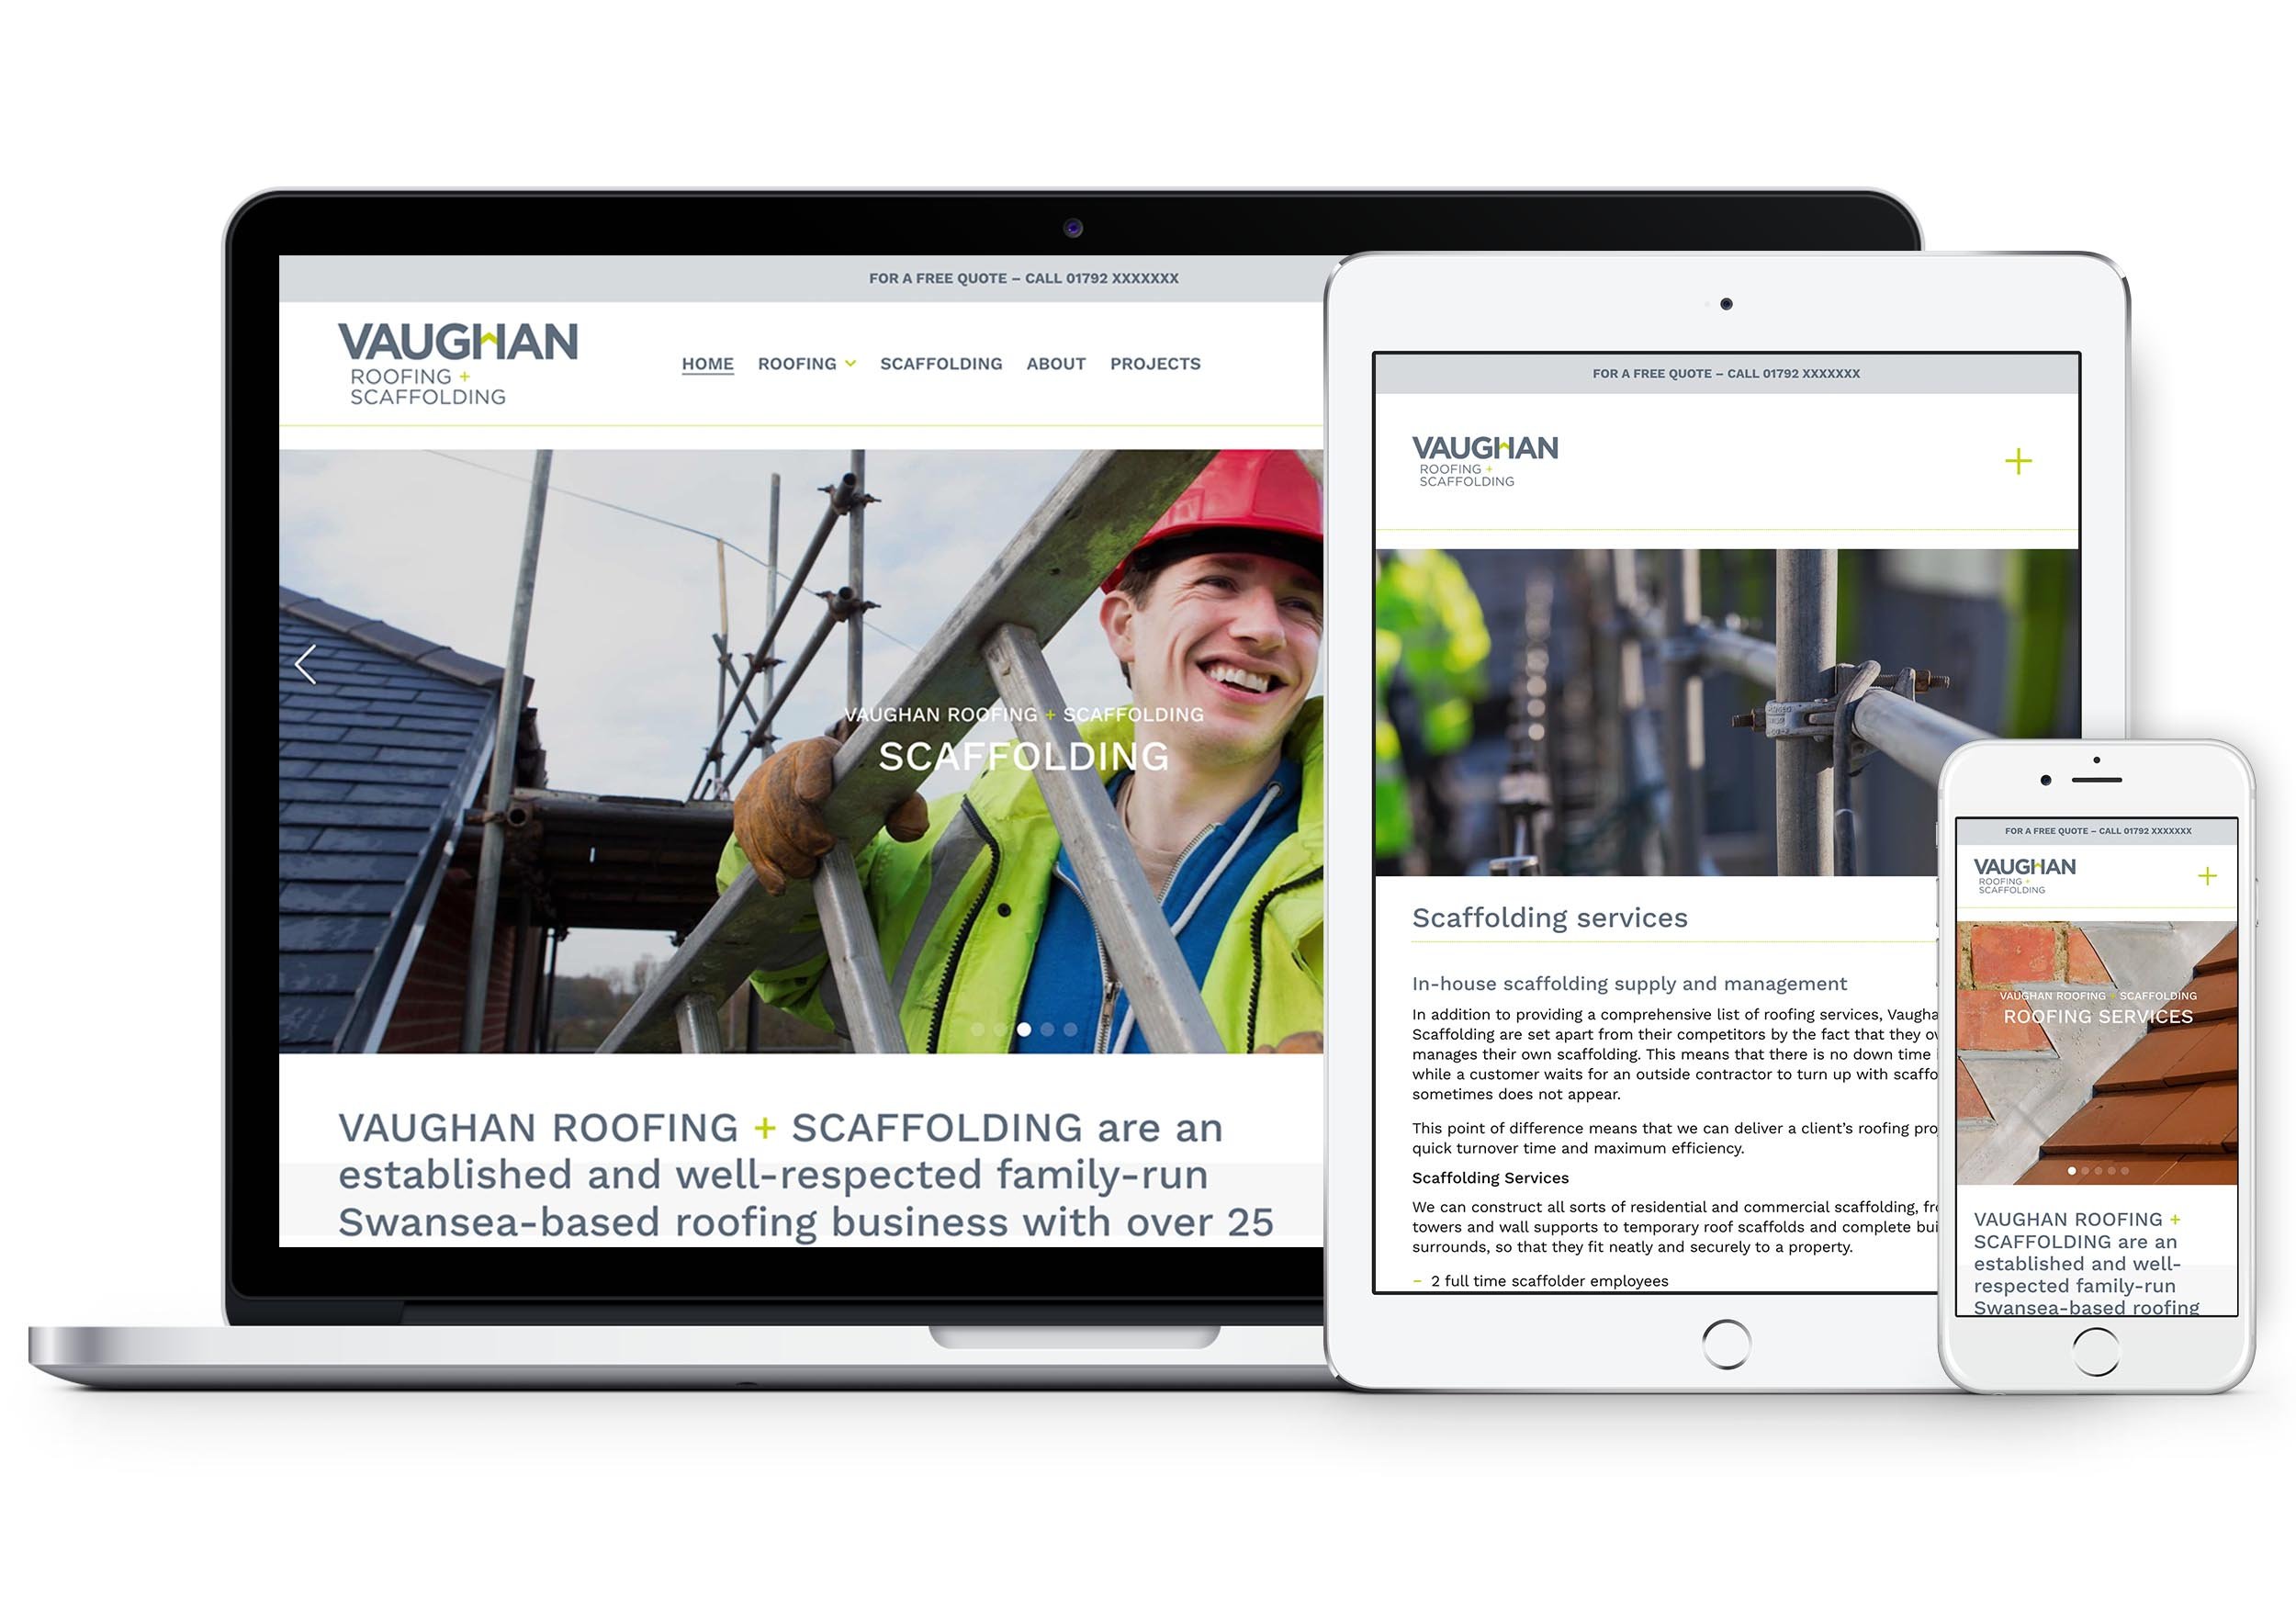 Vaughan Roofing + Scaffolding services